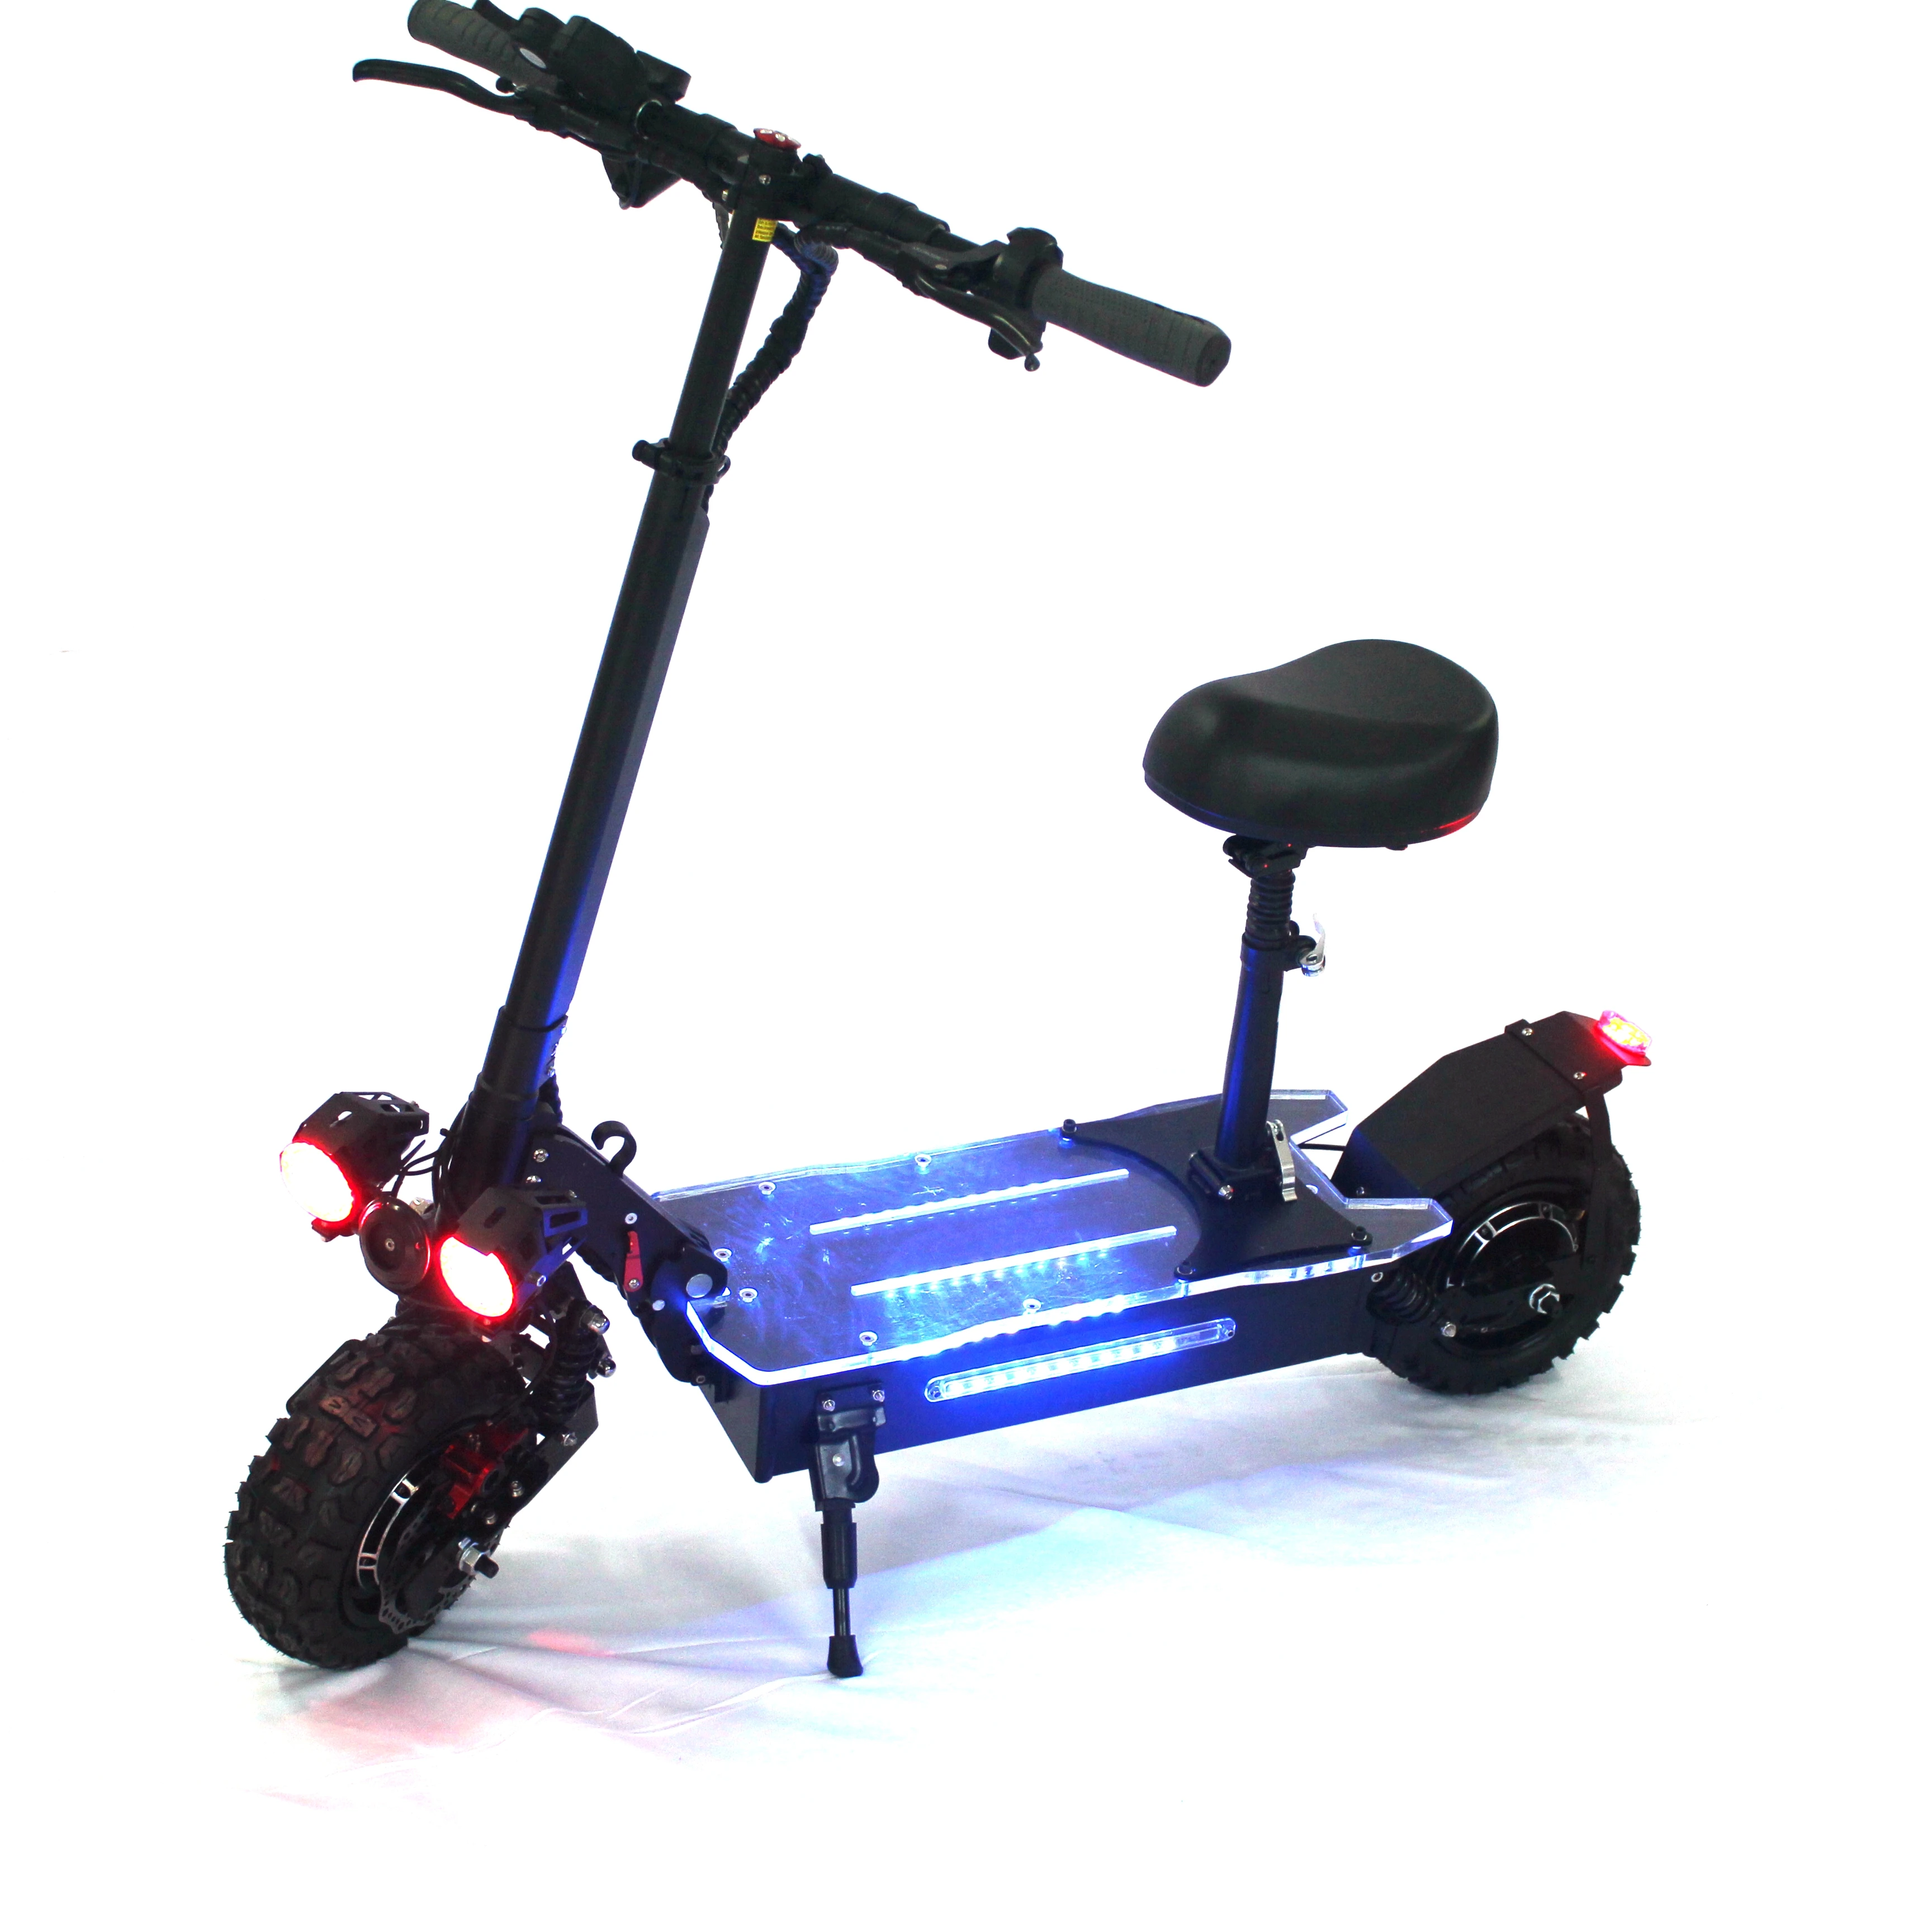 

60V 5600W 80km/h electric off road waterproof scooter 2022 best selling EU US warehouse with CE FCC ROHS OEM ODM Drop shipping